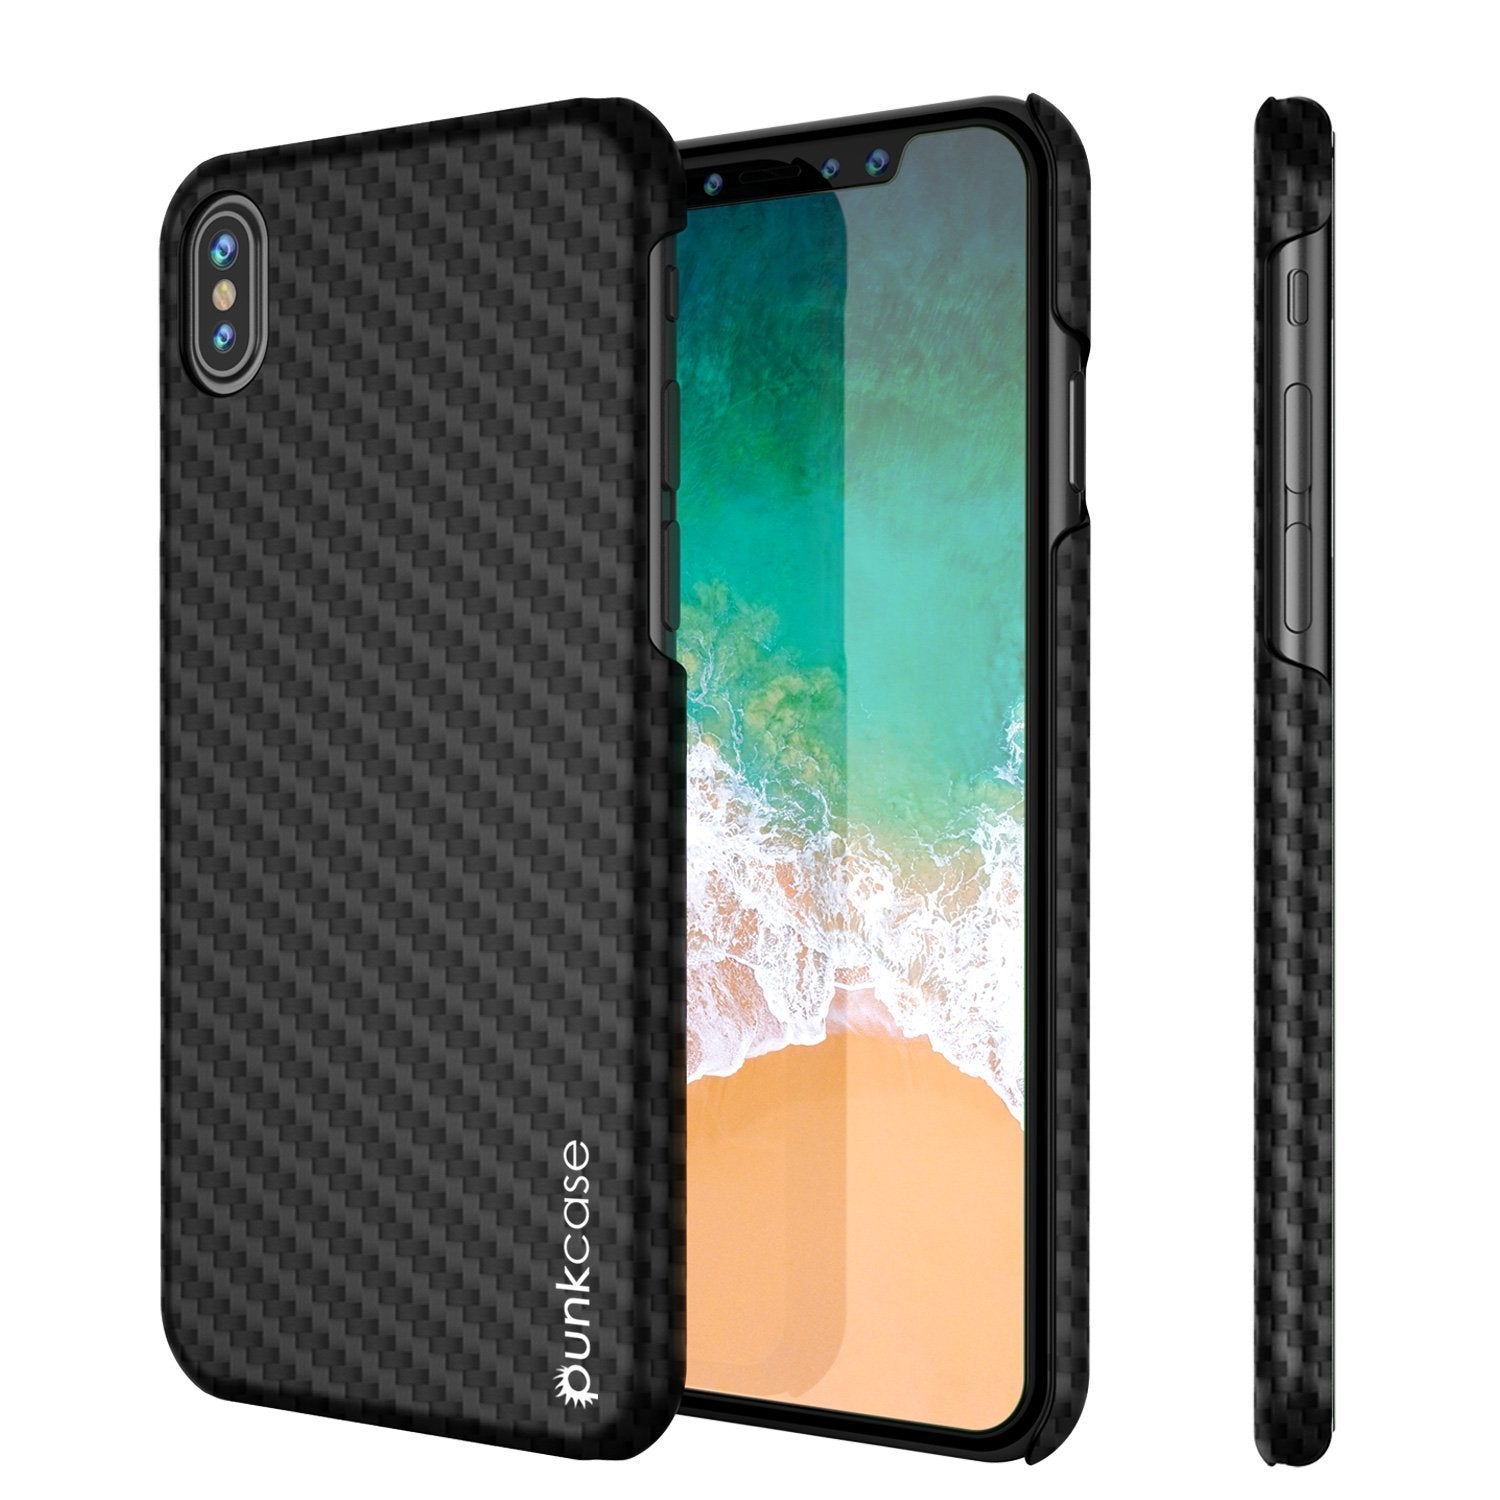 iPhone XS Max Case, Punkcase CarbonShield, Heavy Duty & Ultra Thin 2 Piece Dual Layer [shockproof]